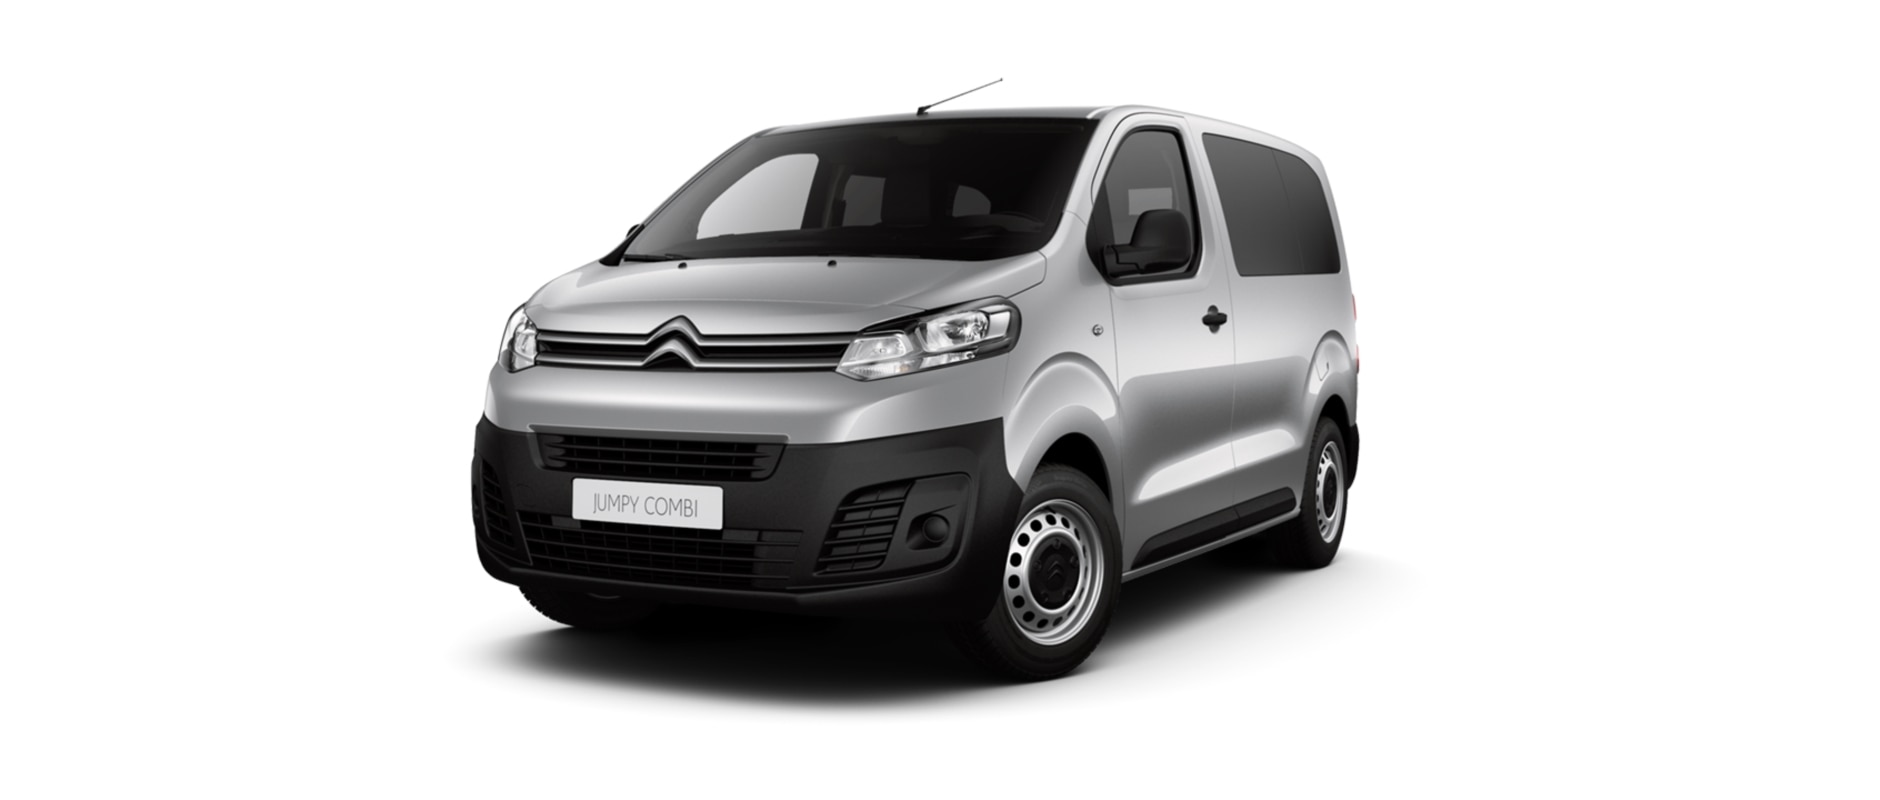 CITROËN JUMPY: A NEW RANGE DESIGNED FOR ALL USES !, Citroën